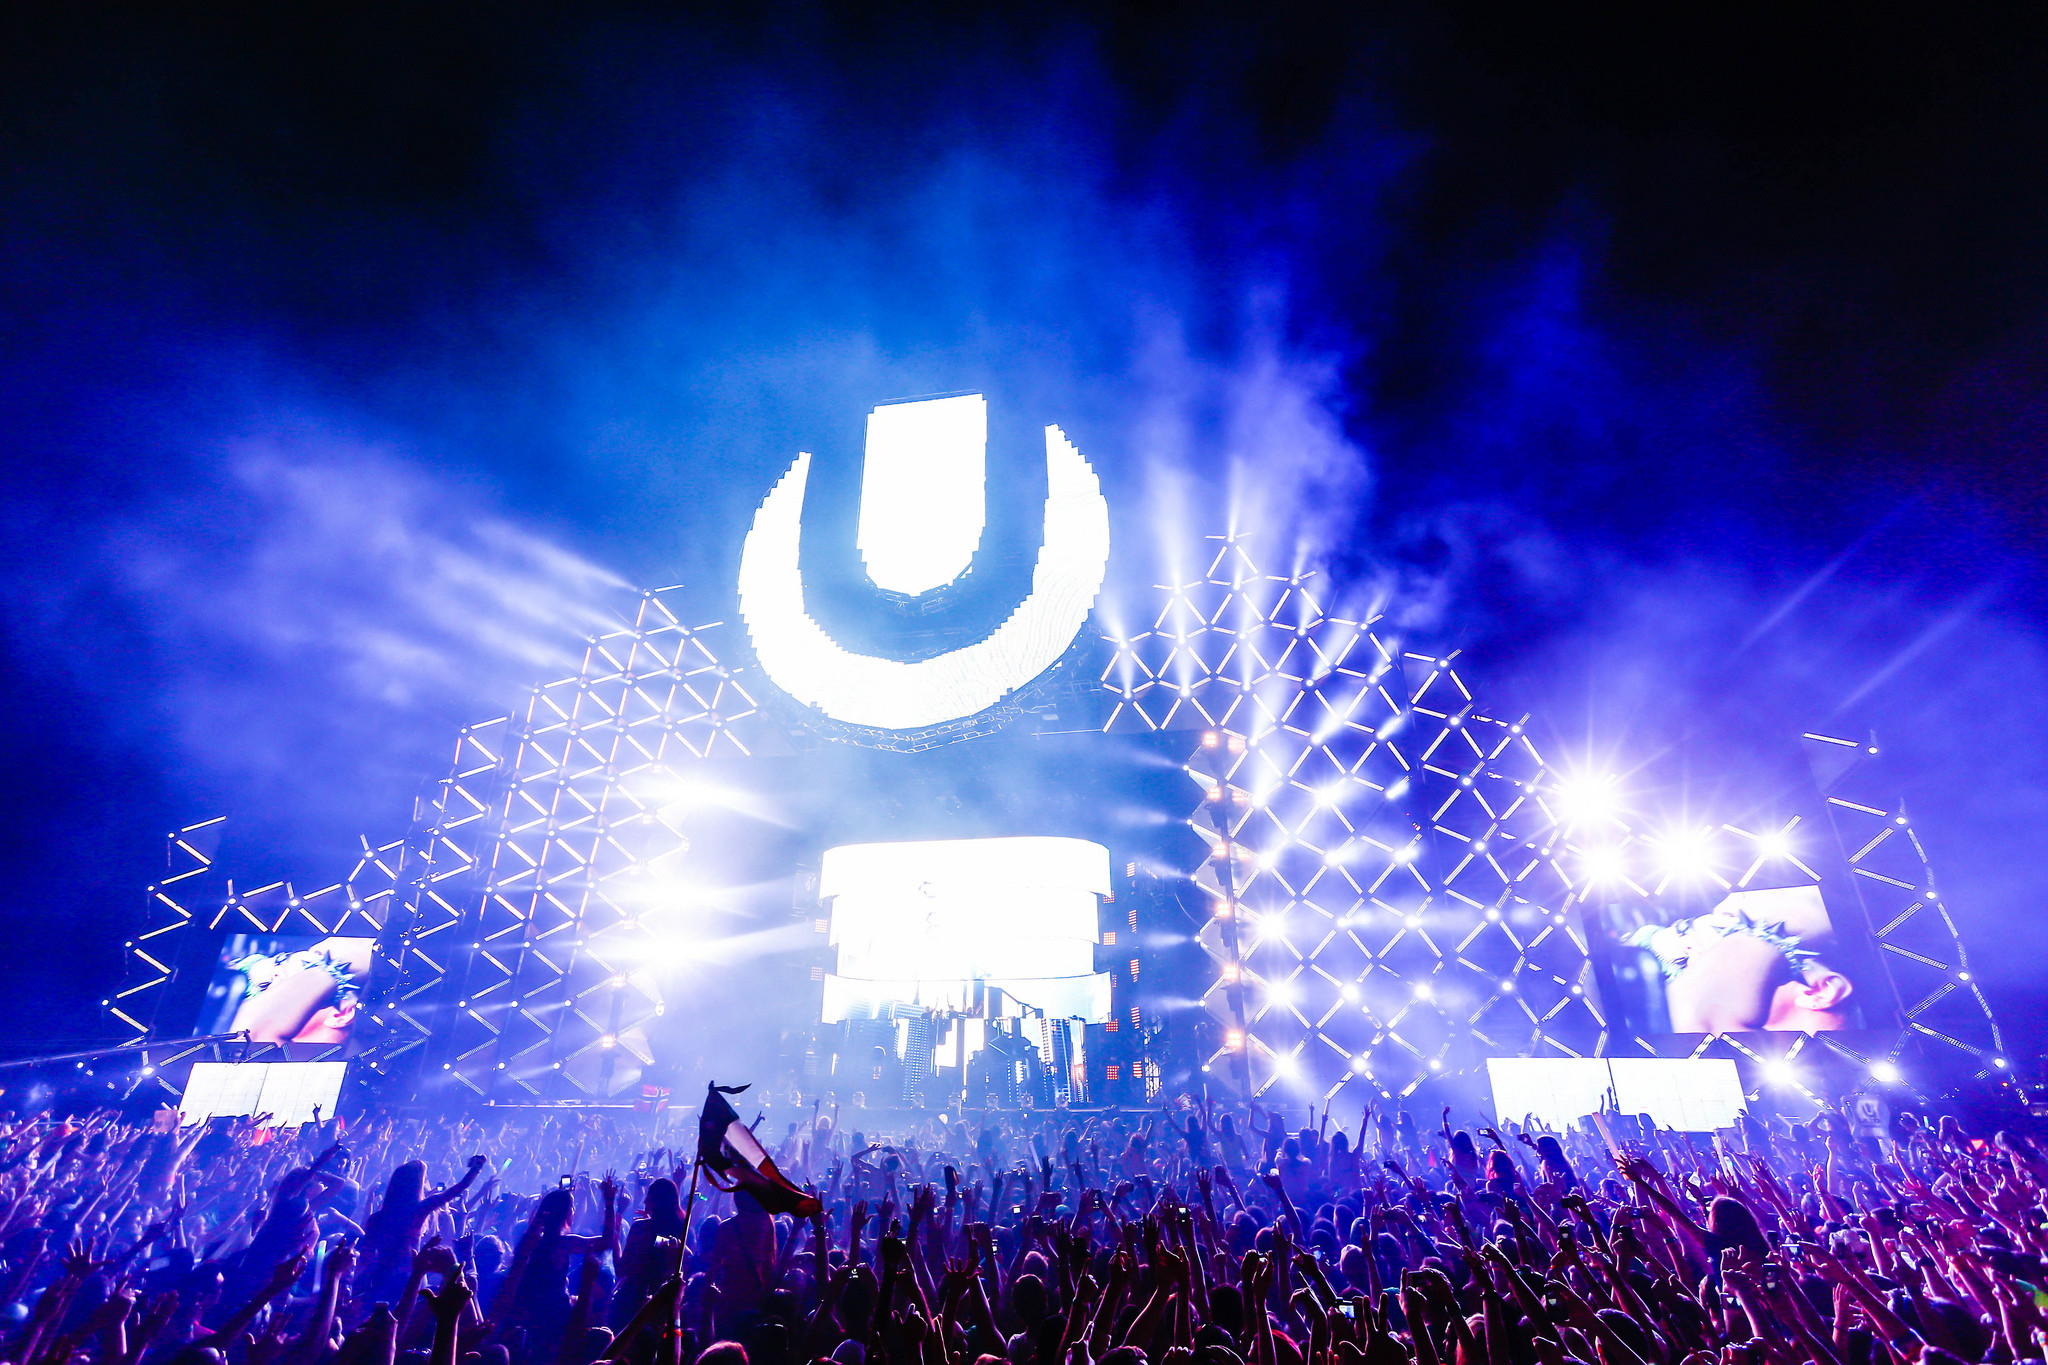 2048x1365 Ultra Music Festival Just Dropped An Incredible Lineup That Includes The  Return Of Pendulum!